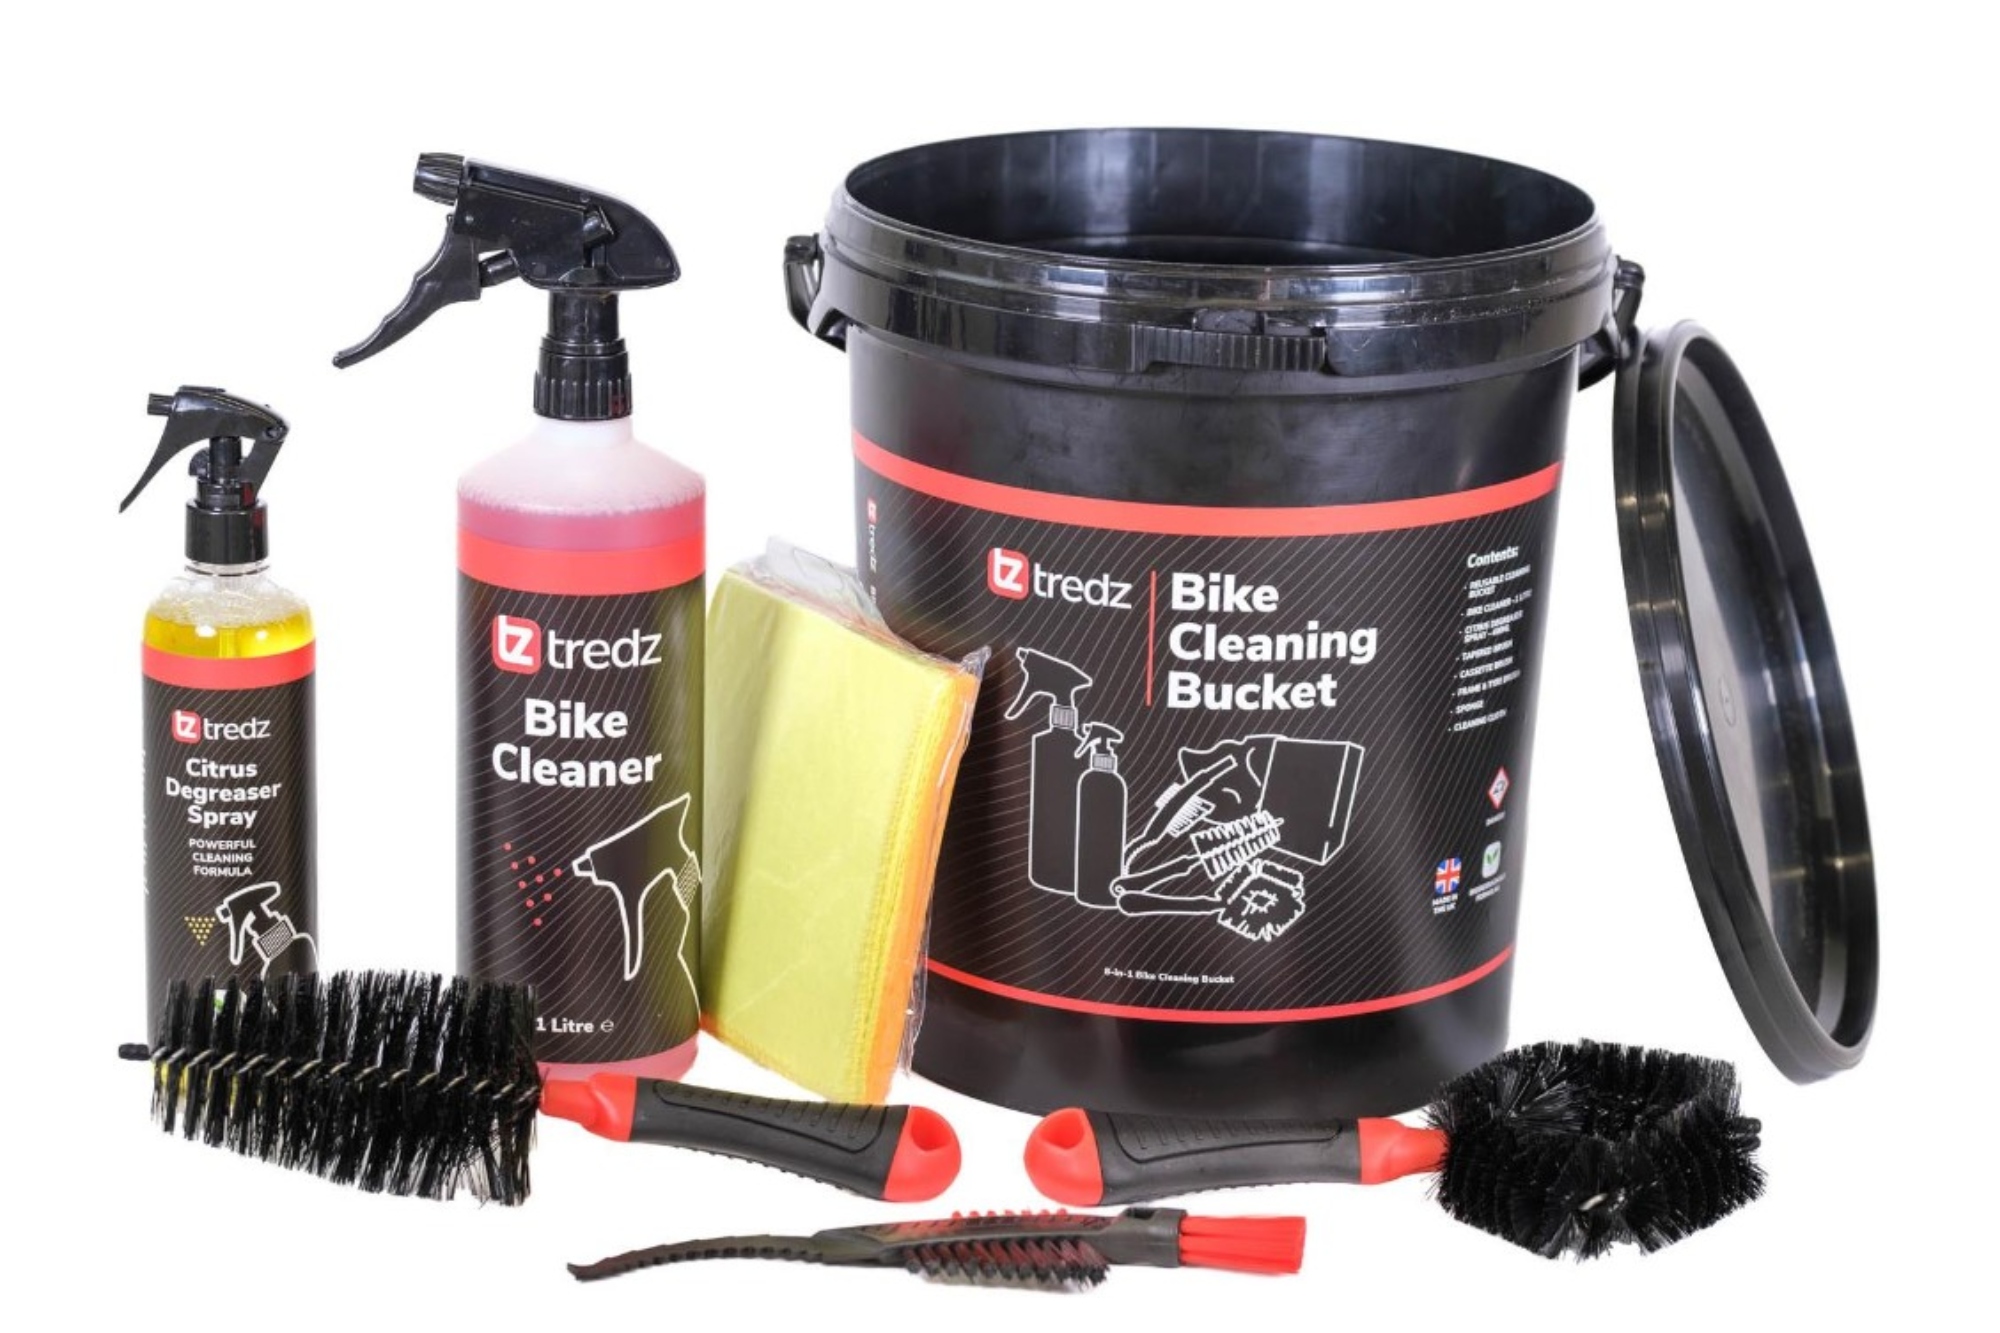 Tredz  8 in 1 cleaning kit all on display